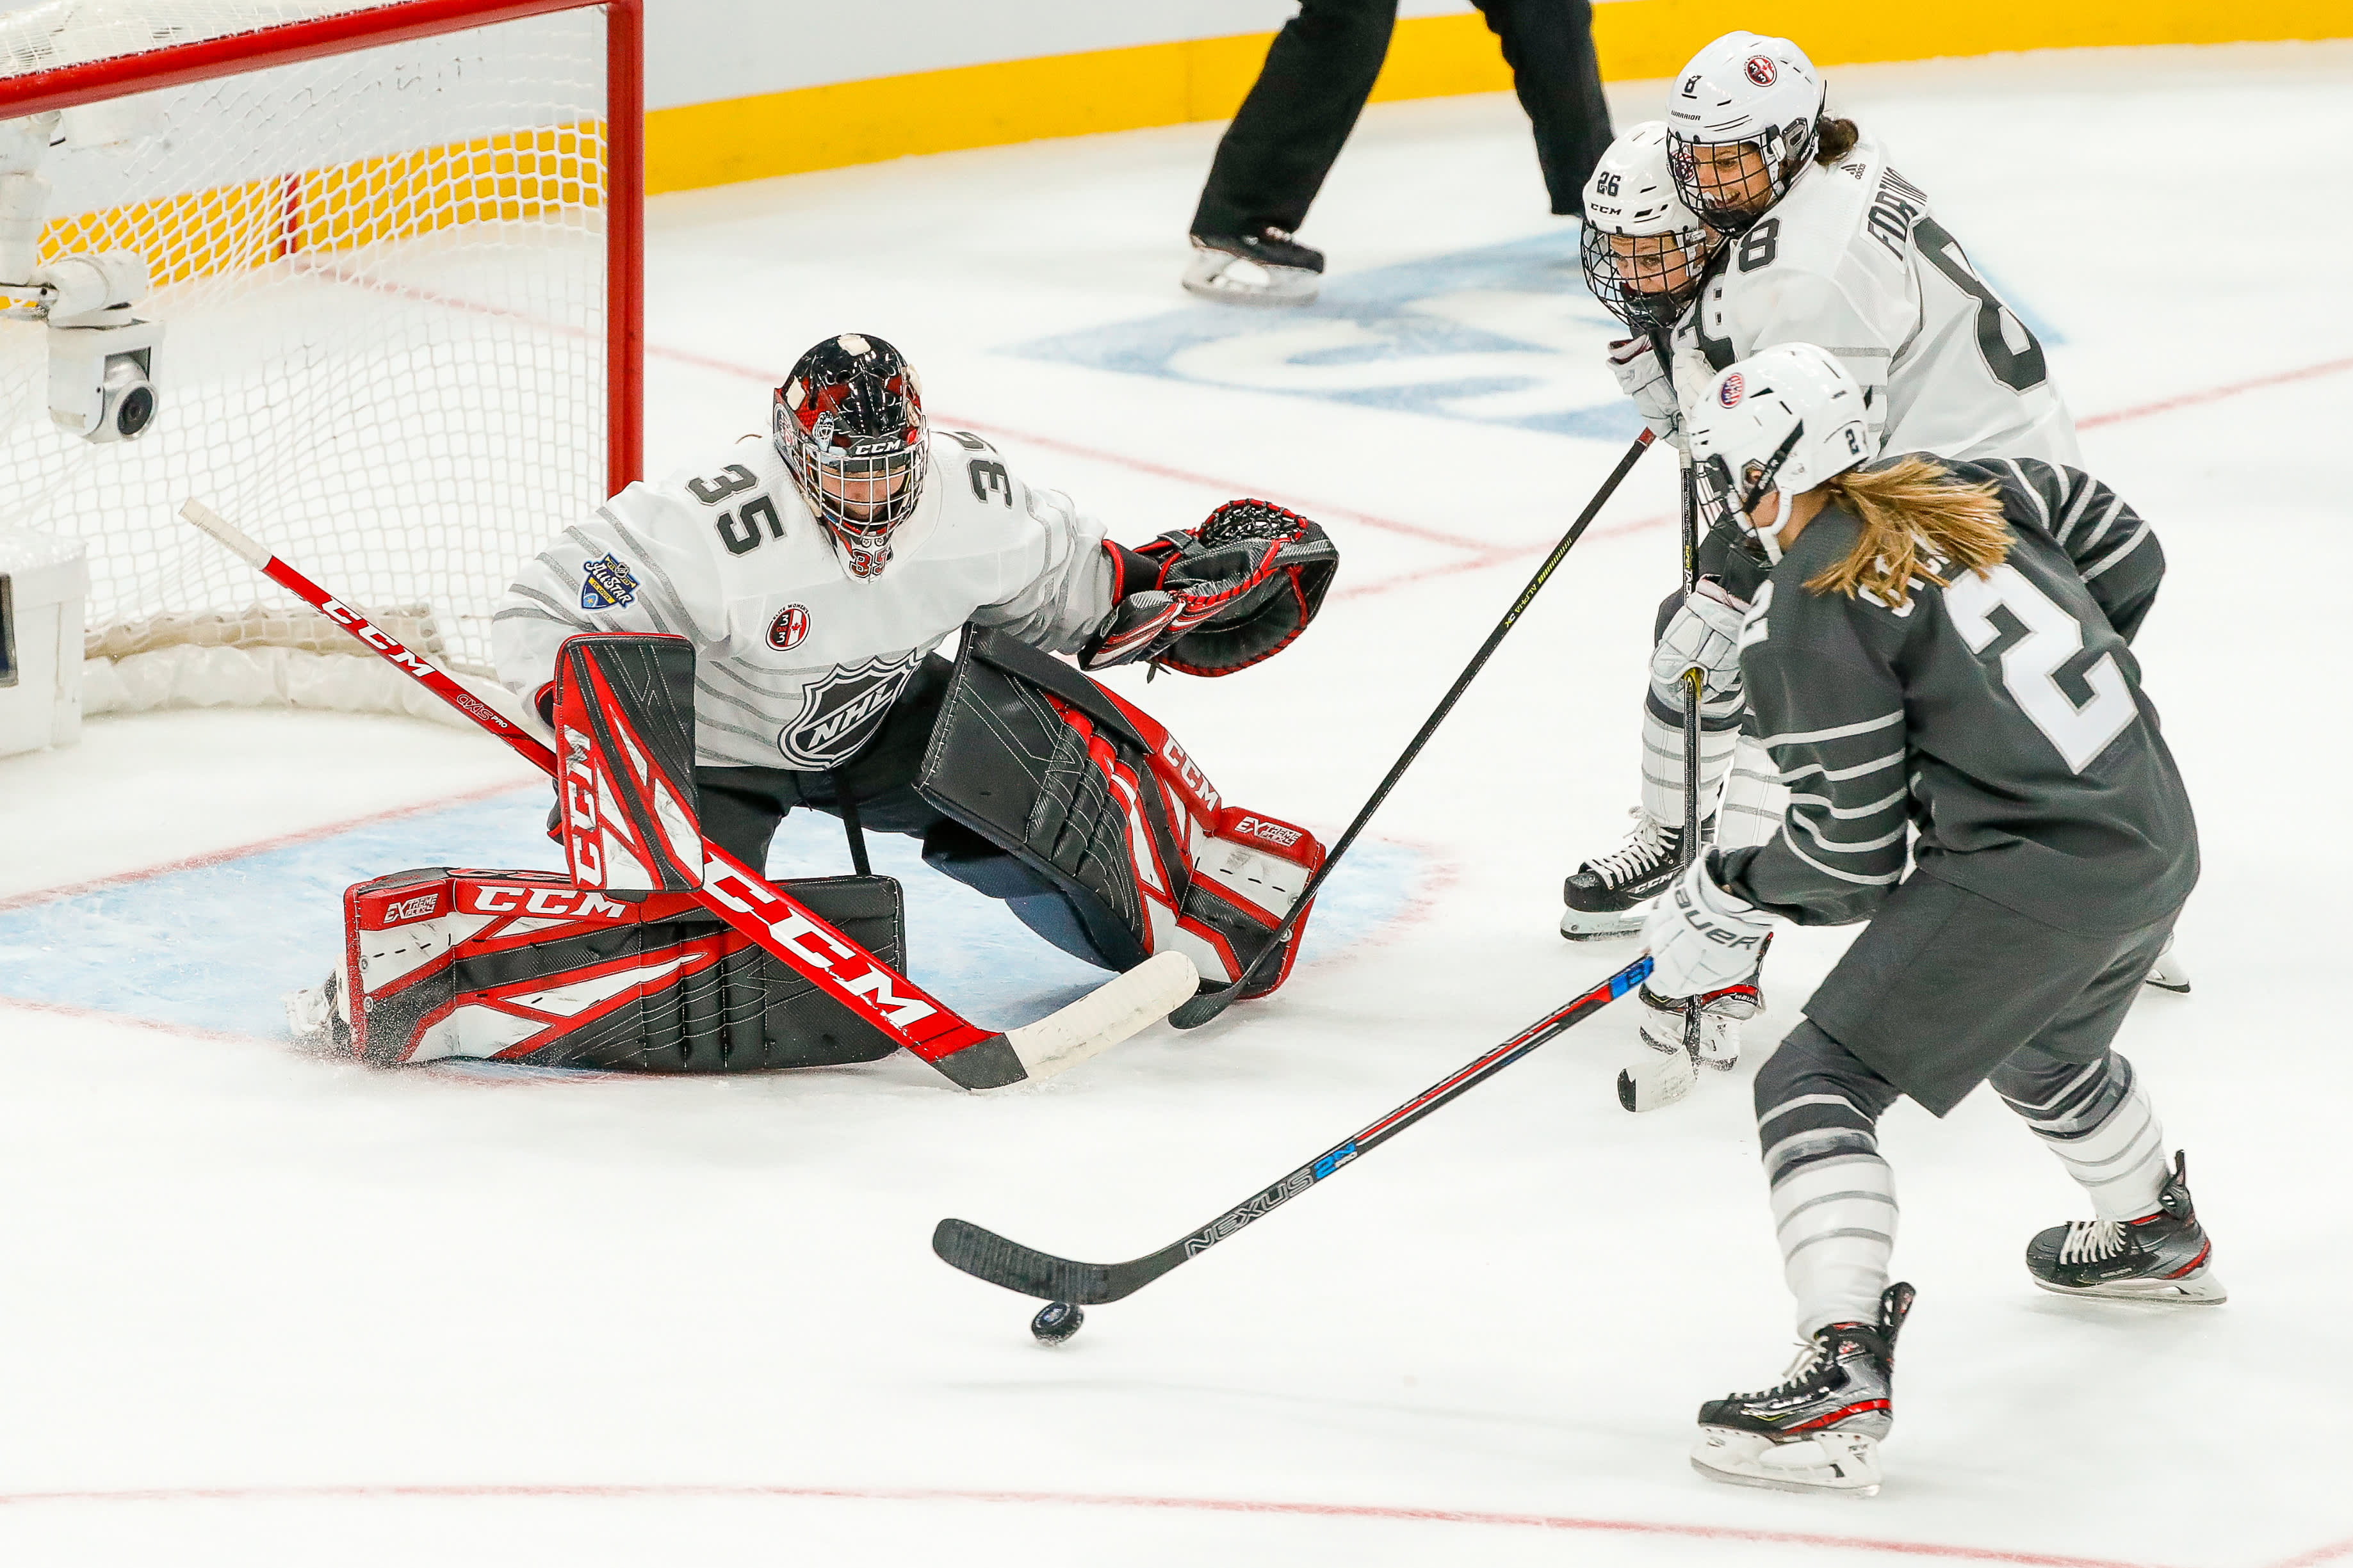 Team Canada goaltender Ann-Renee Desbiens (35) prepares to make save on shot by Team USA defenseman Lee Stecklein (2) during the 2020 NHL All-Star Skills Elite Women's 3-on-3 presented by Adidas on January 24, 2020, at Enterprise Center in St. Louis, MO. (Photo by John Crouch/Icon Sportswire via Getty Images)